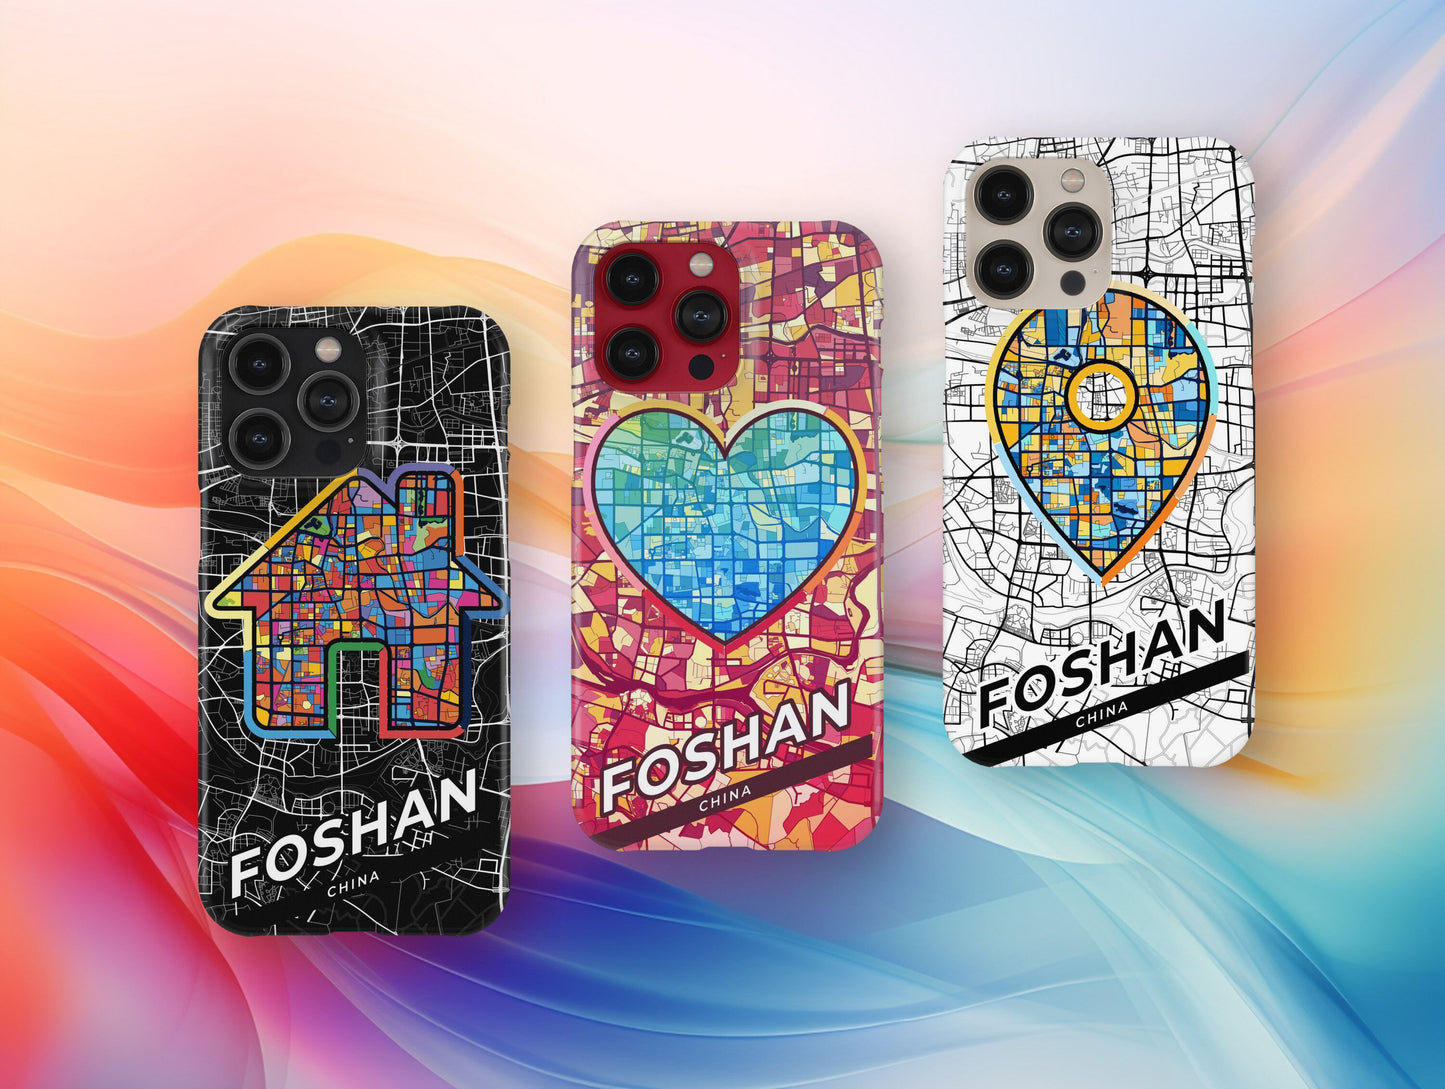 Foshan China slim phone case with colorful icon. Birthday, wedding or housewarming gift. Couple match cases.